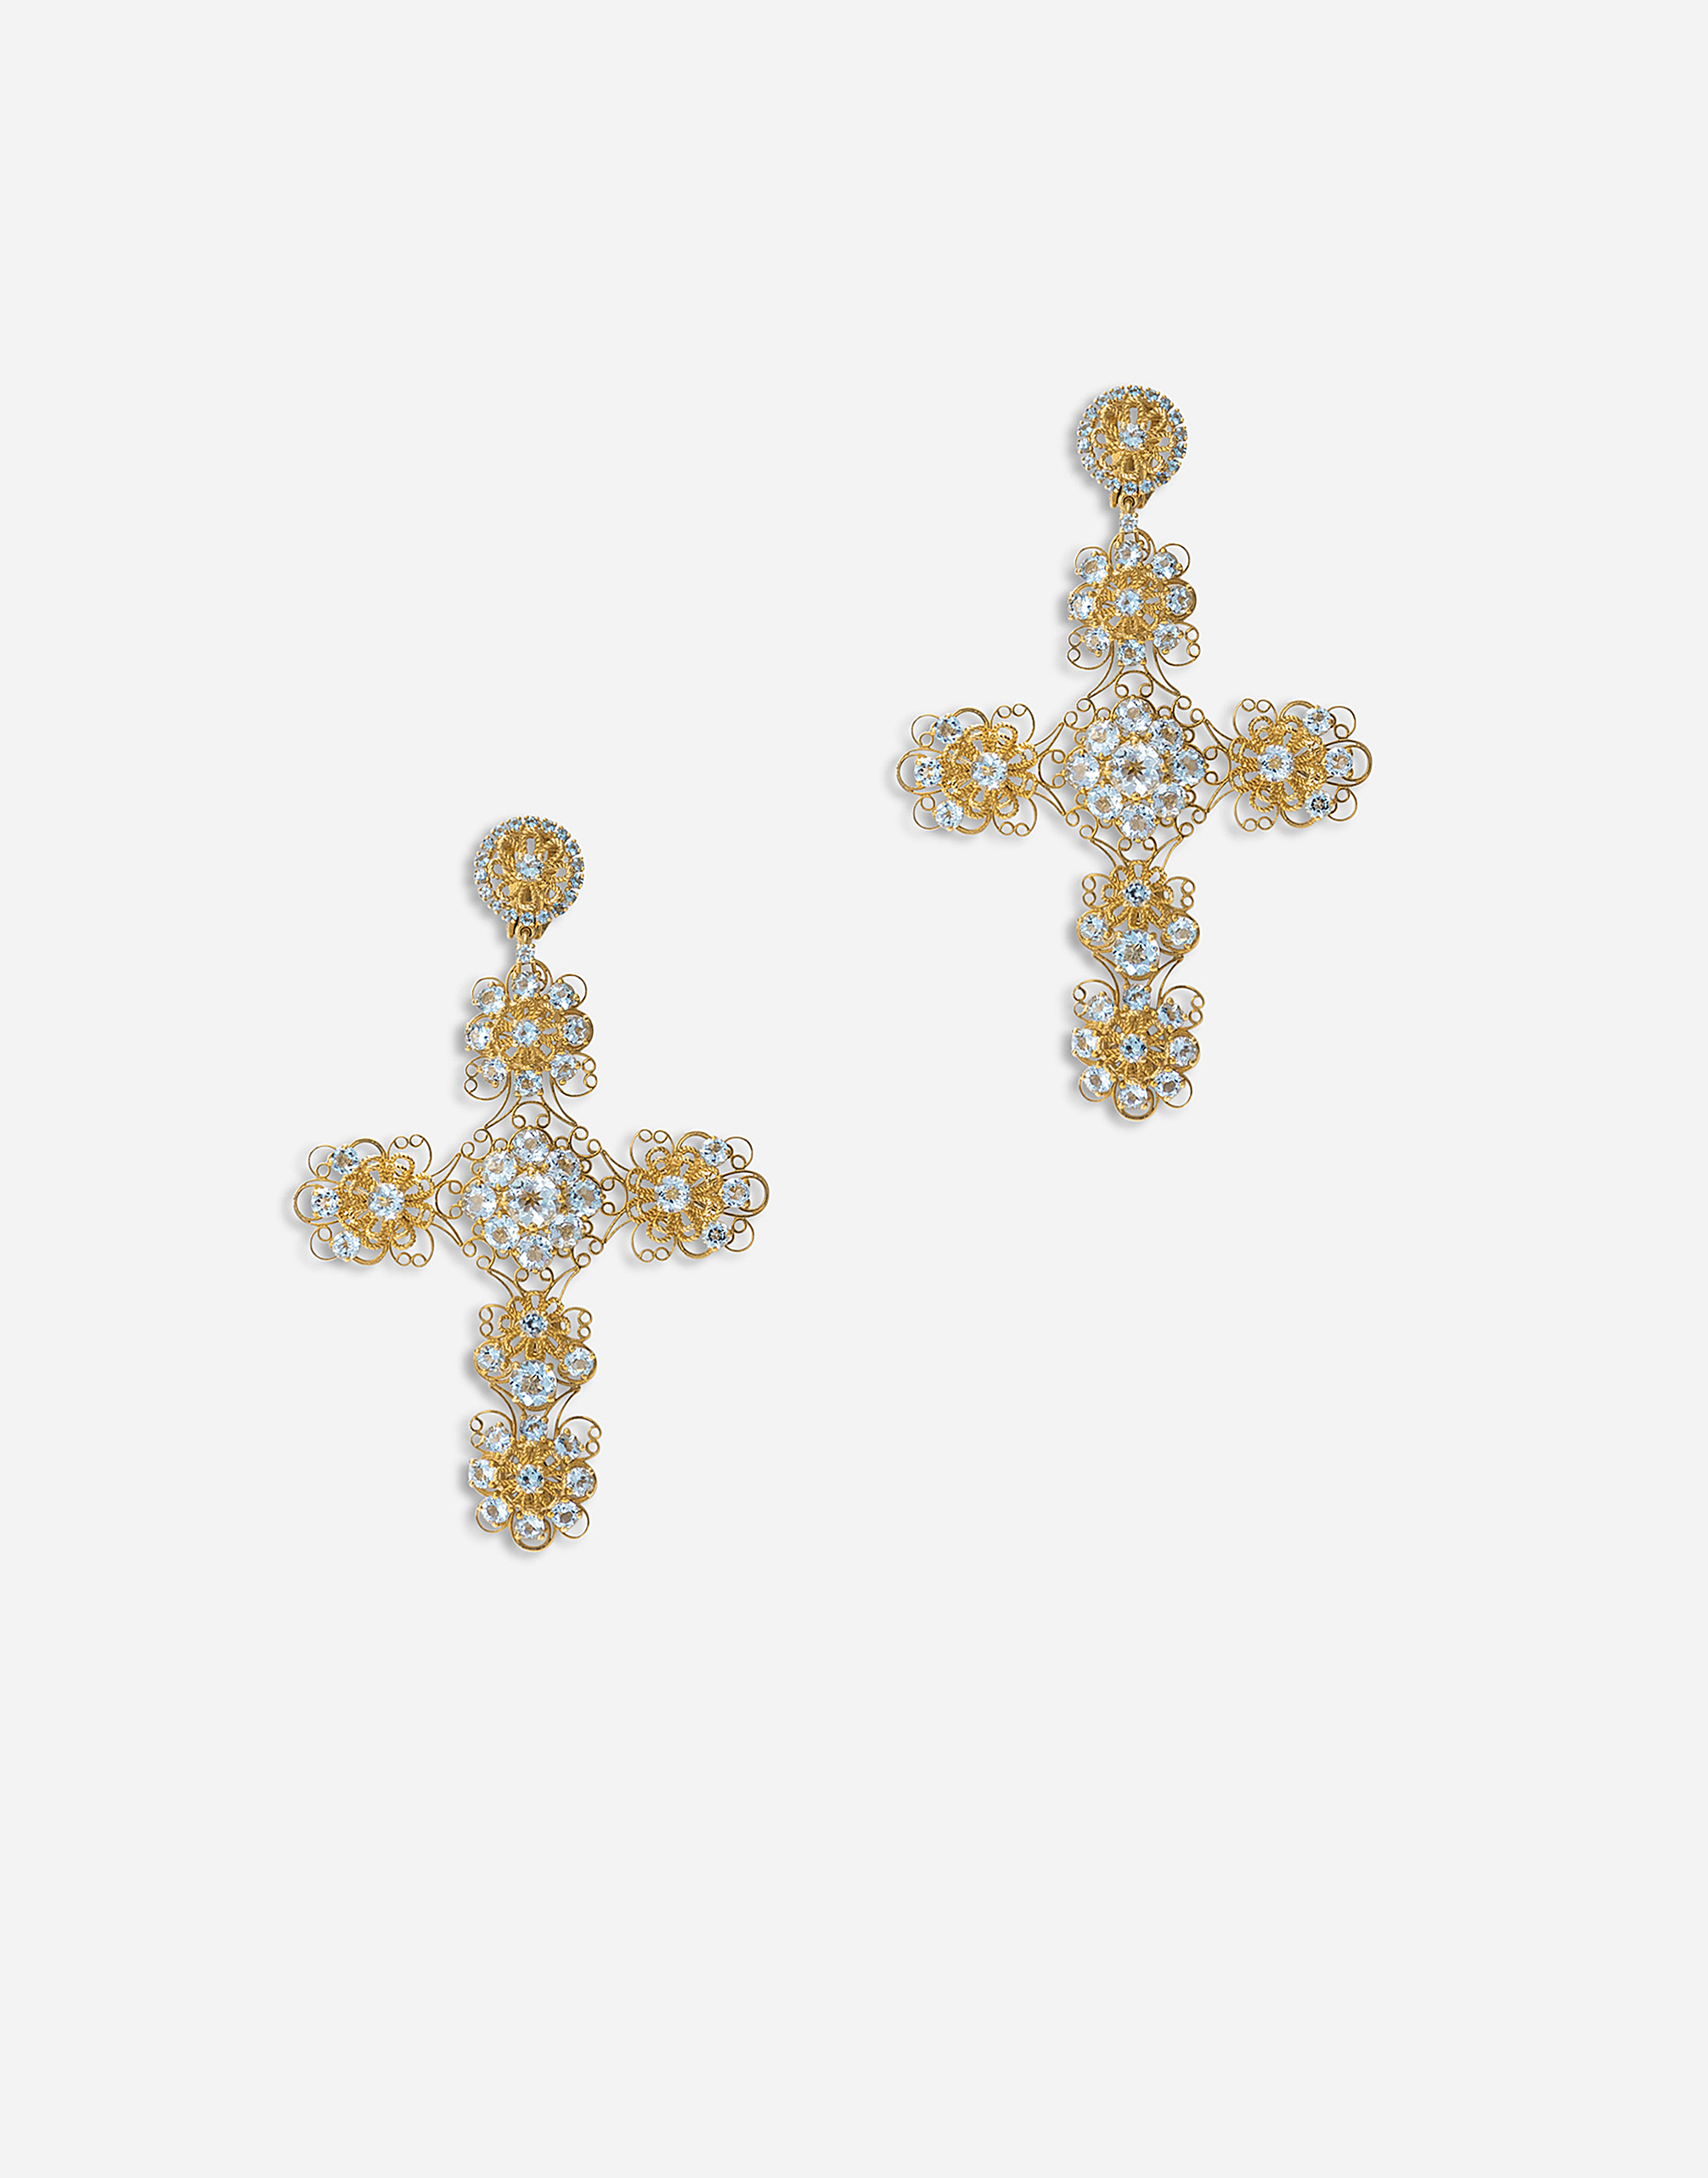 Pizzo earrings in yellow 18kt gold with aquamarines in Gold